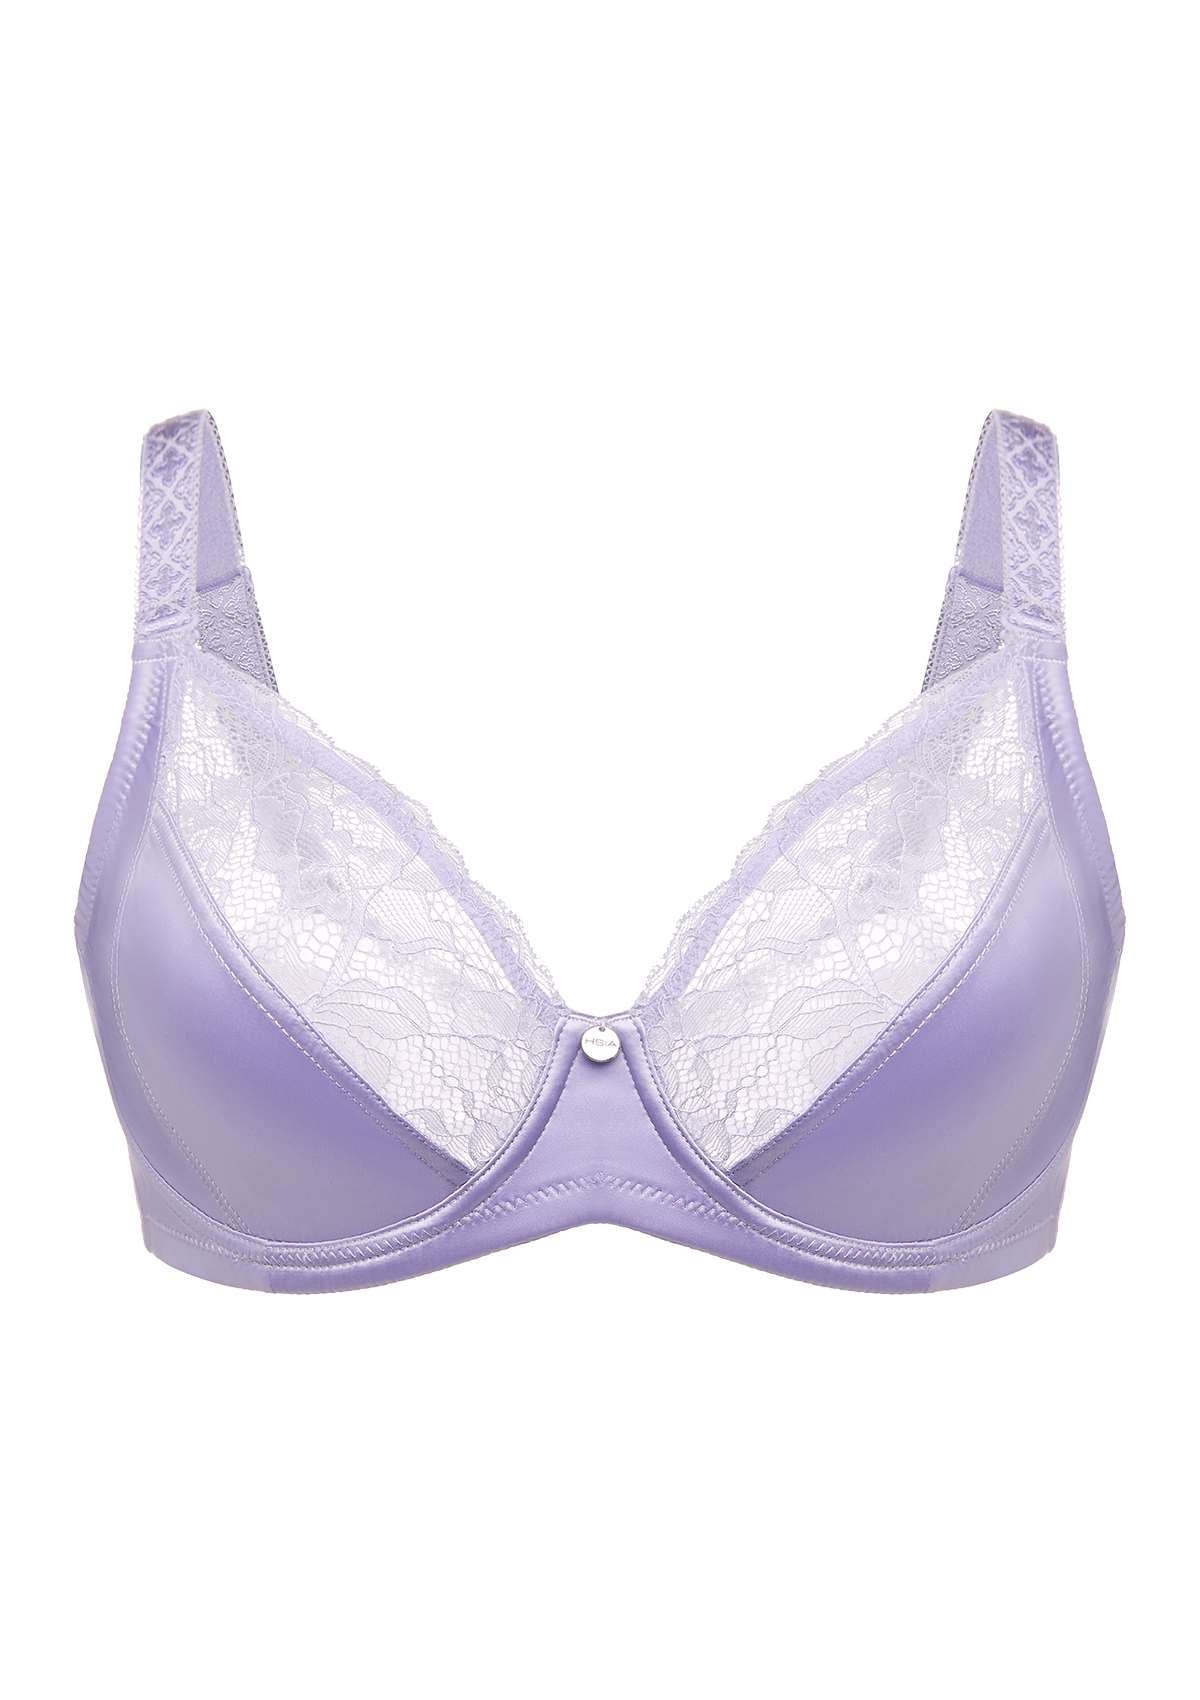 HSIA Foxy Satin Smooth Floral Lace Full Coverage Underwire Bra Set - Purple / 44 / D